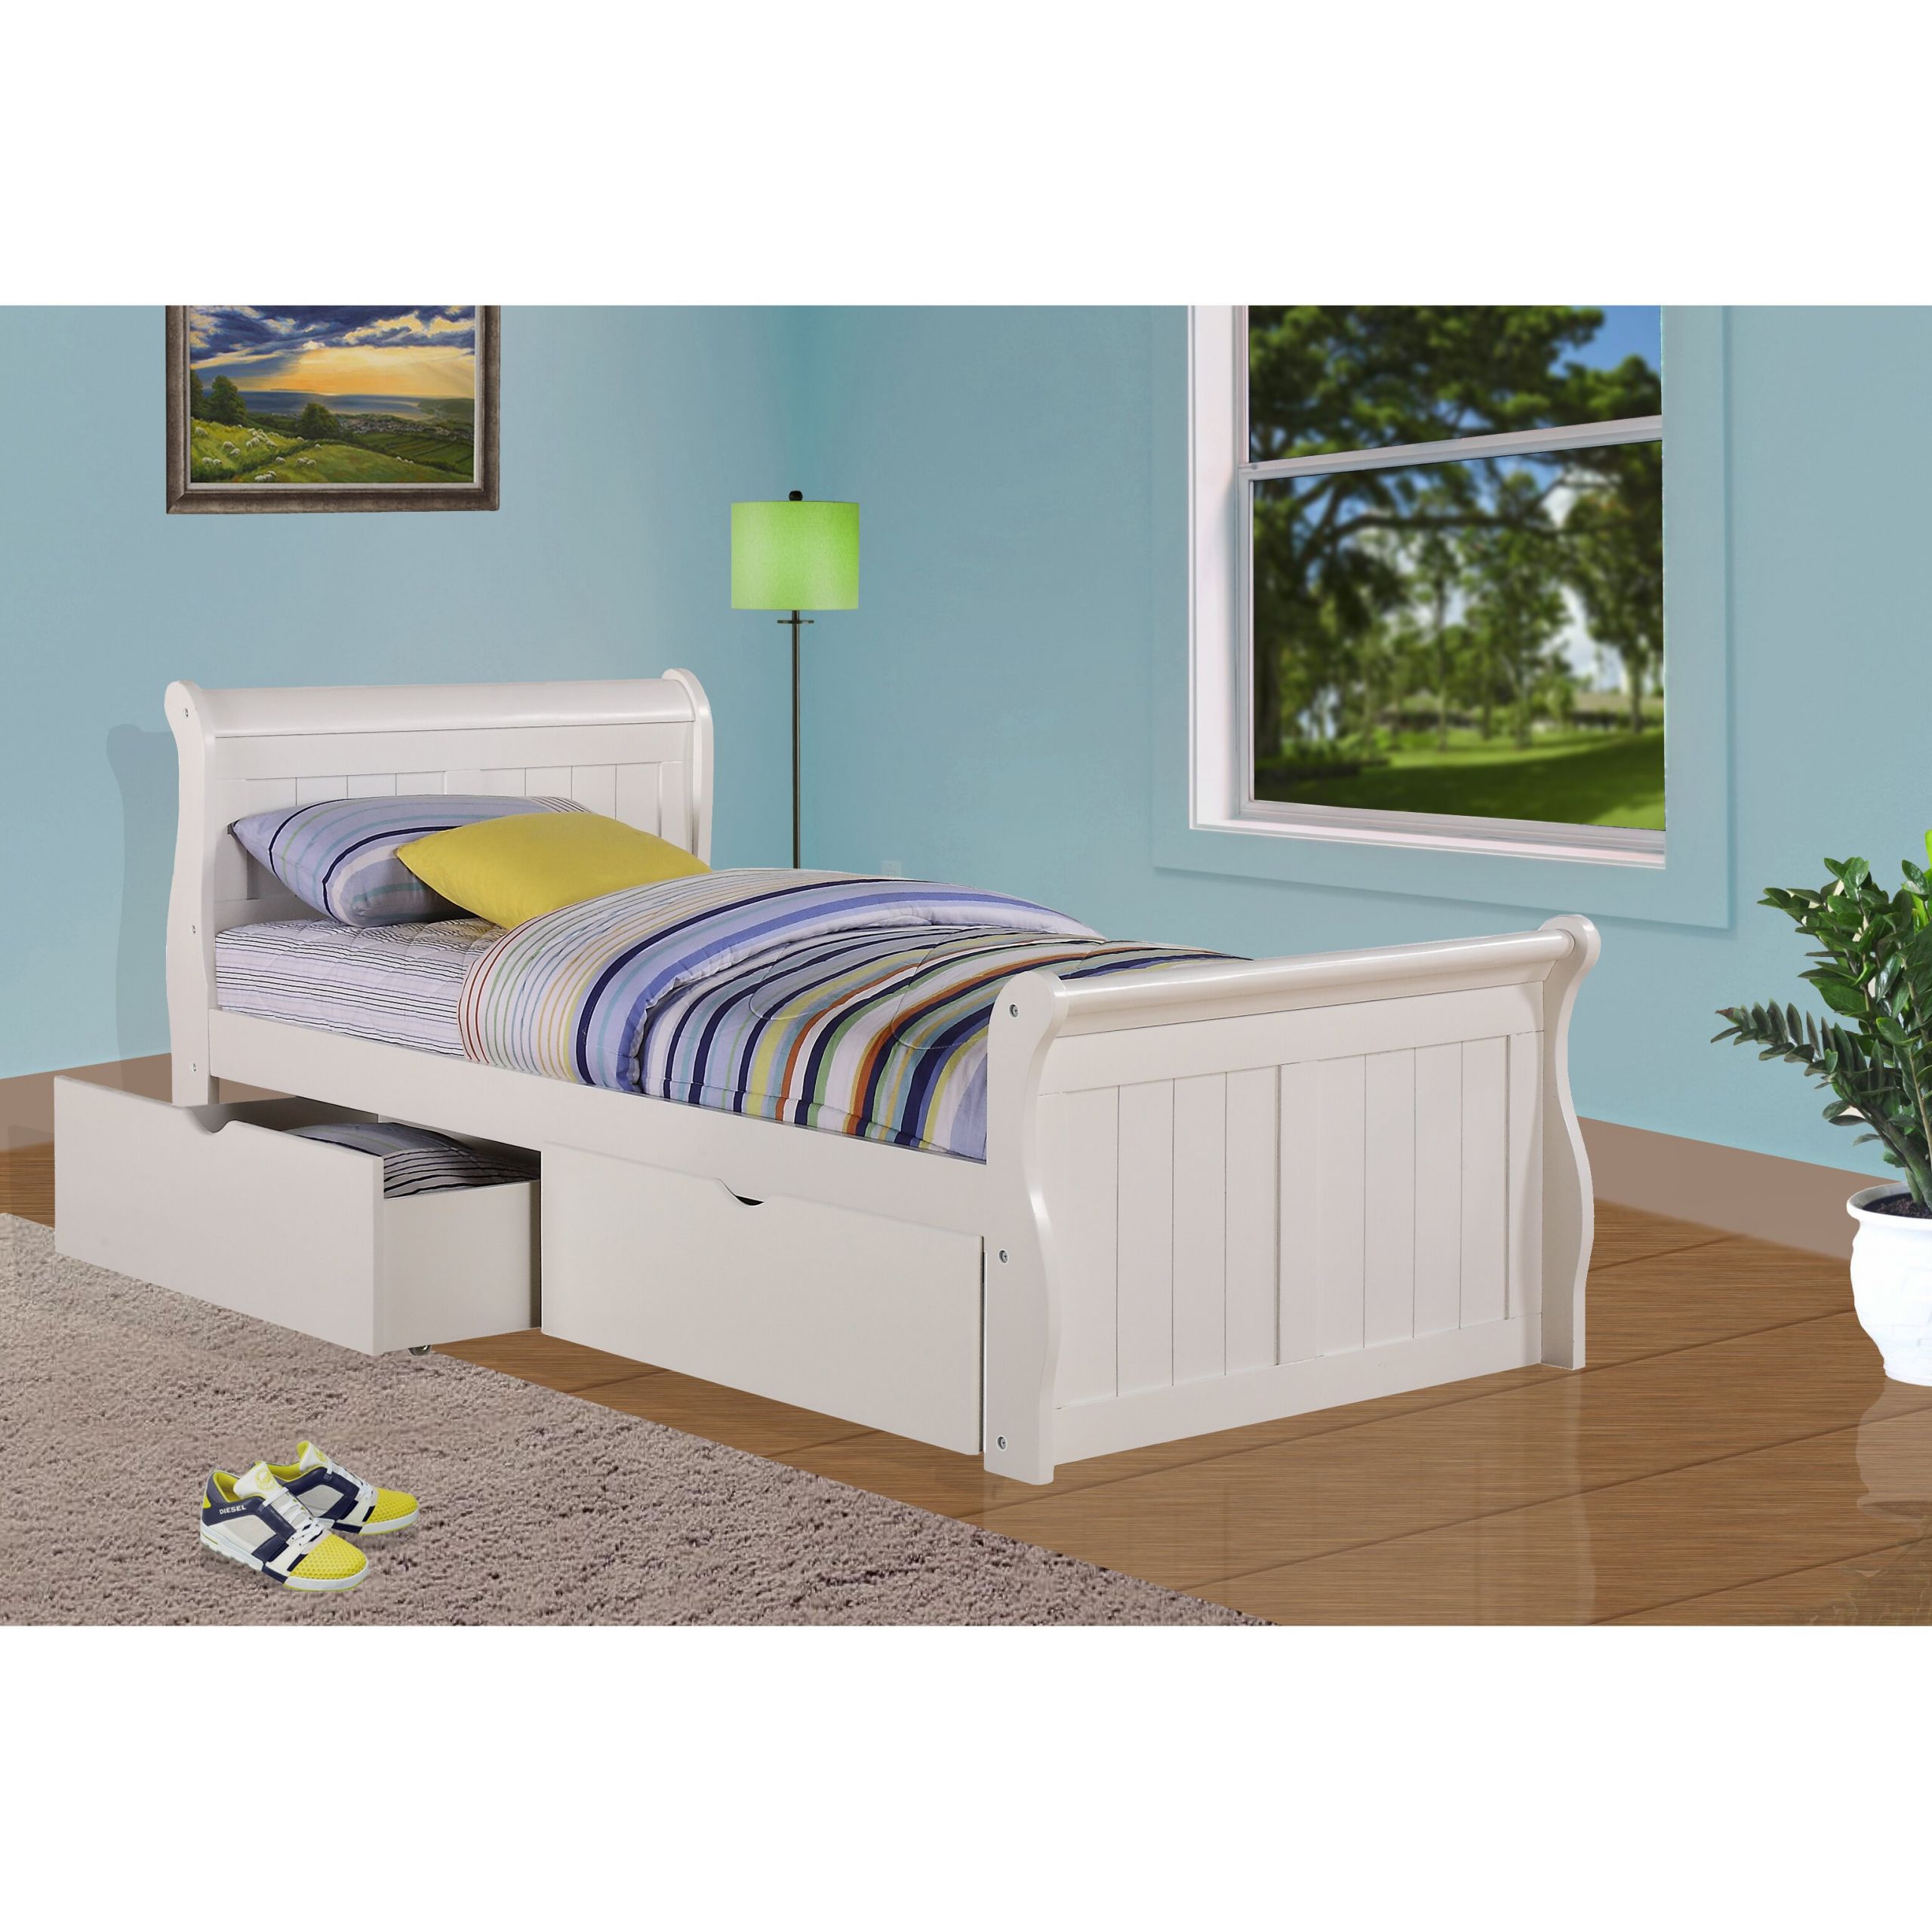 Childrens Beds With Underbed Storage
 Donco Kids Sleigh Bed with Storage & Reviews